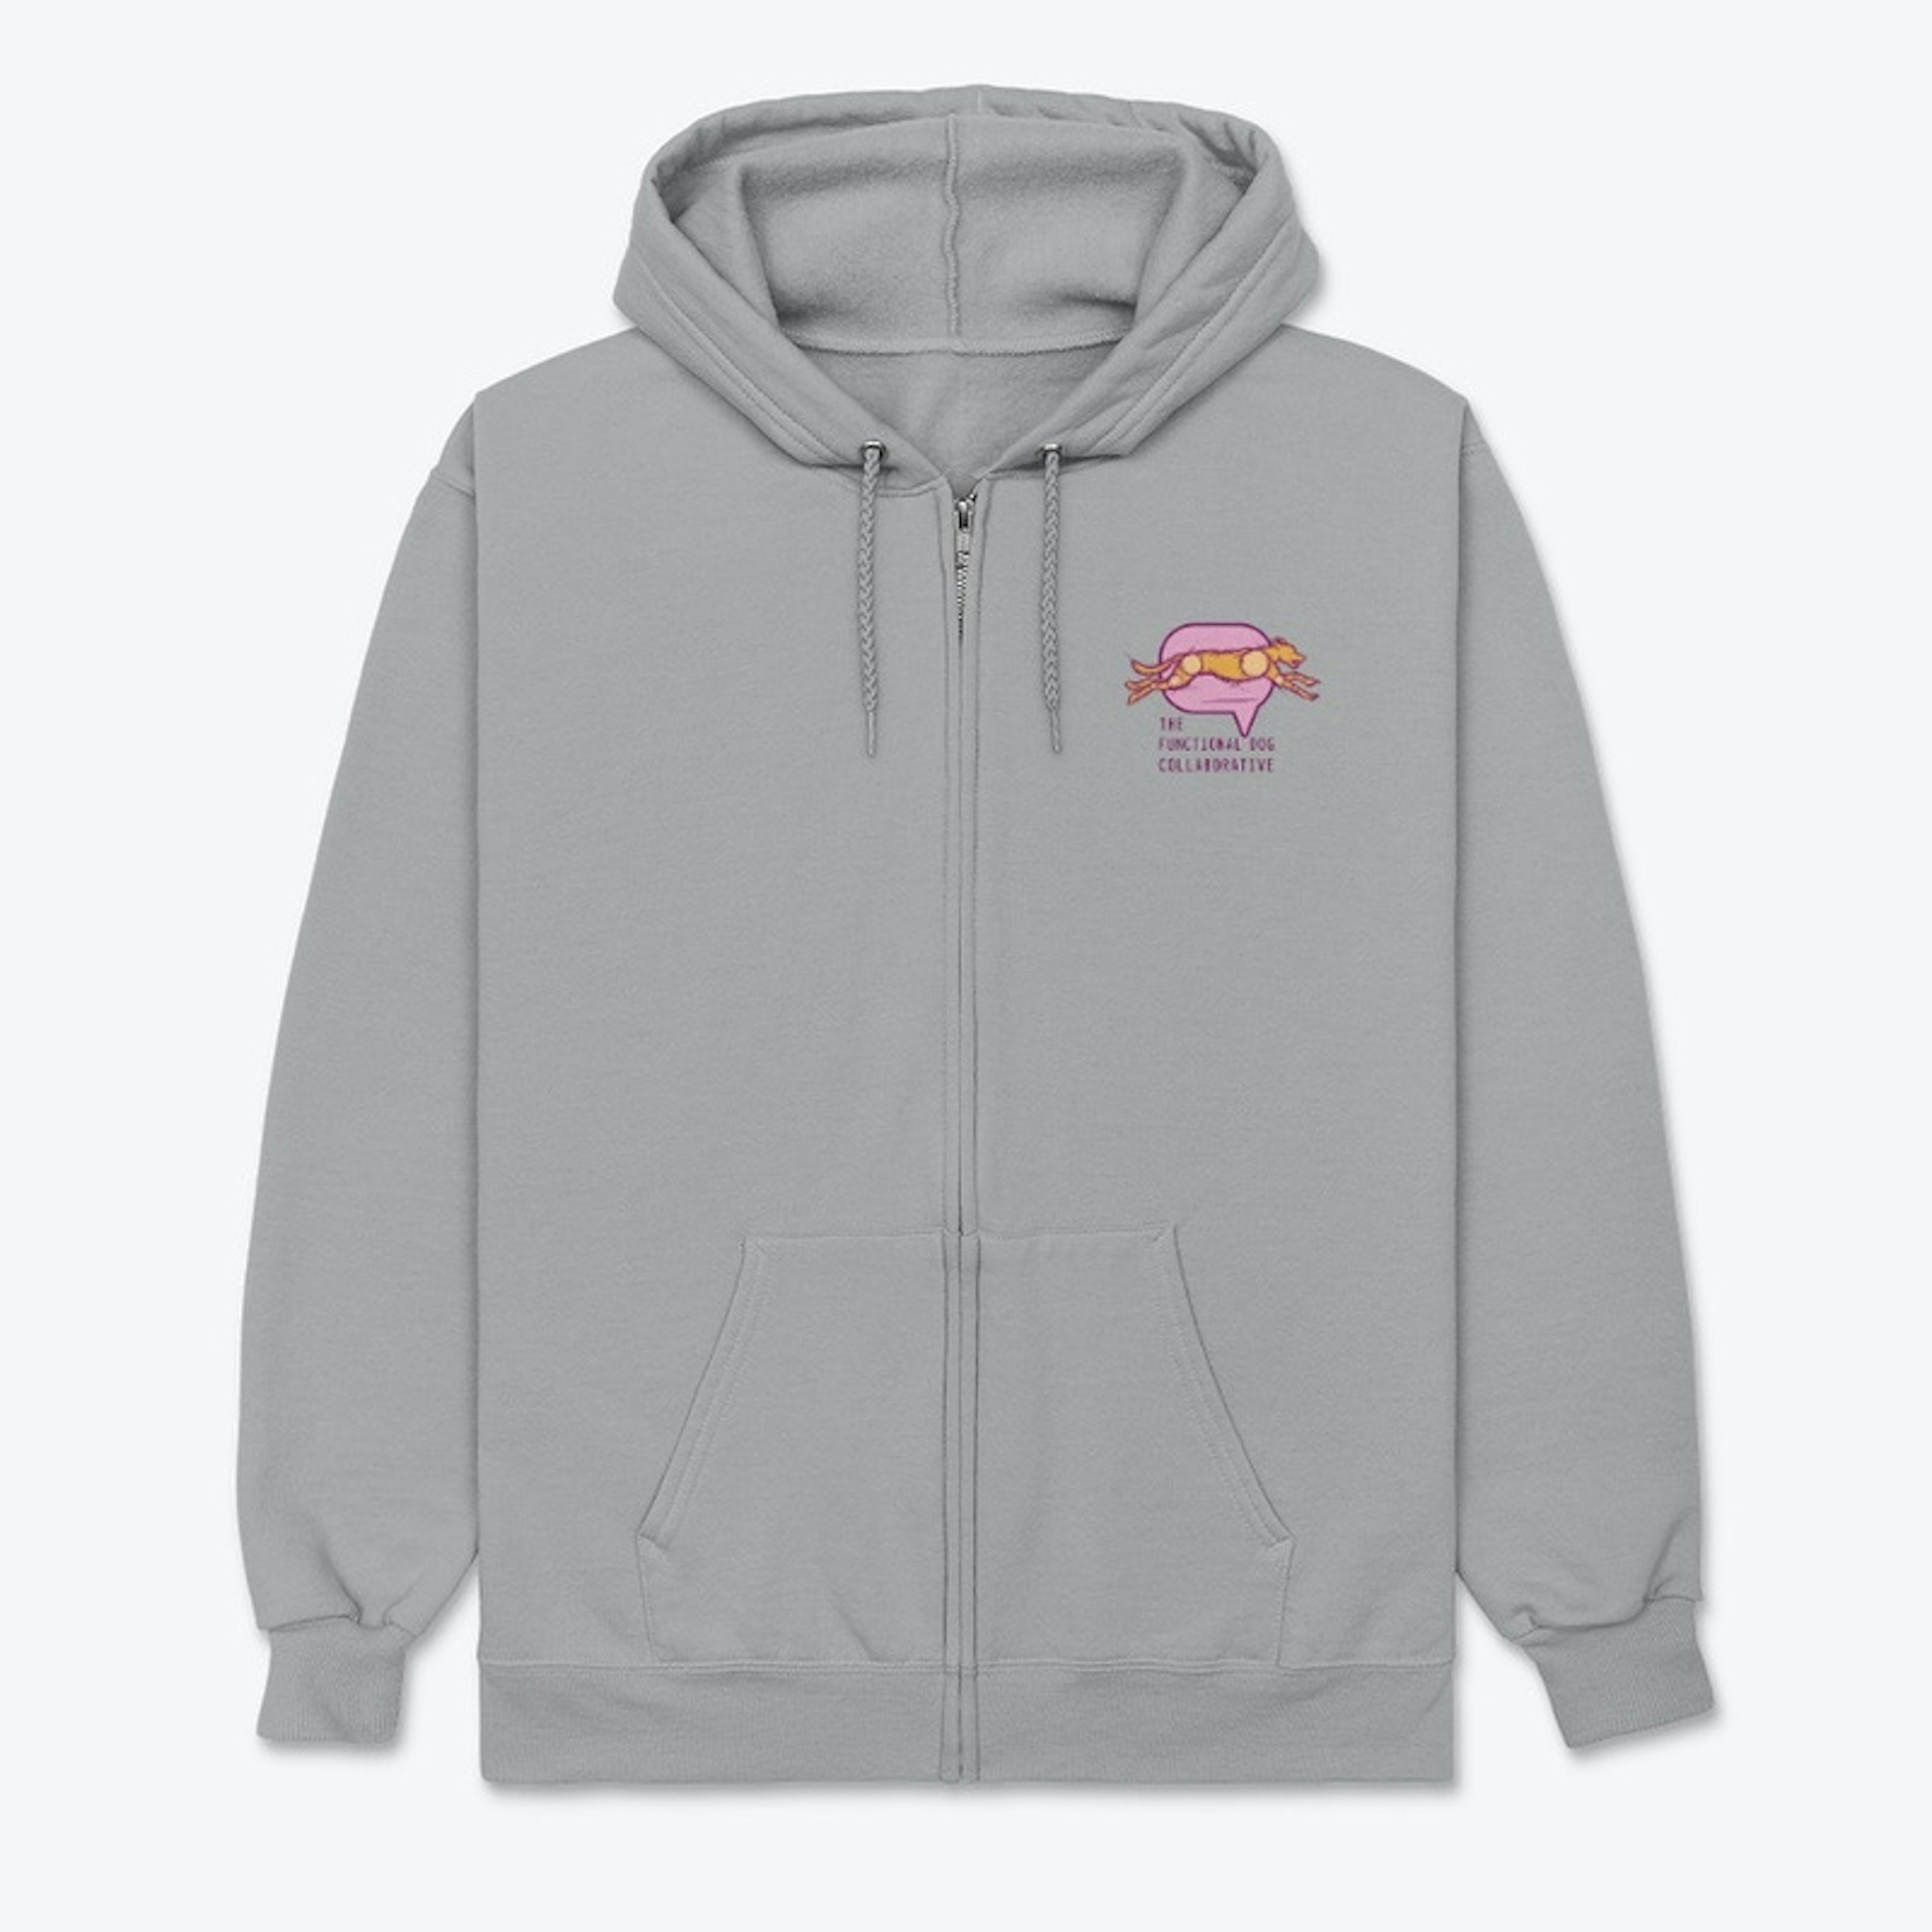 Zipped hoodie with small logo